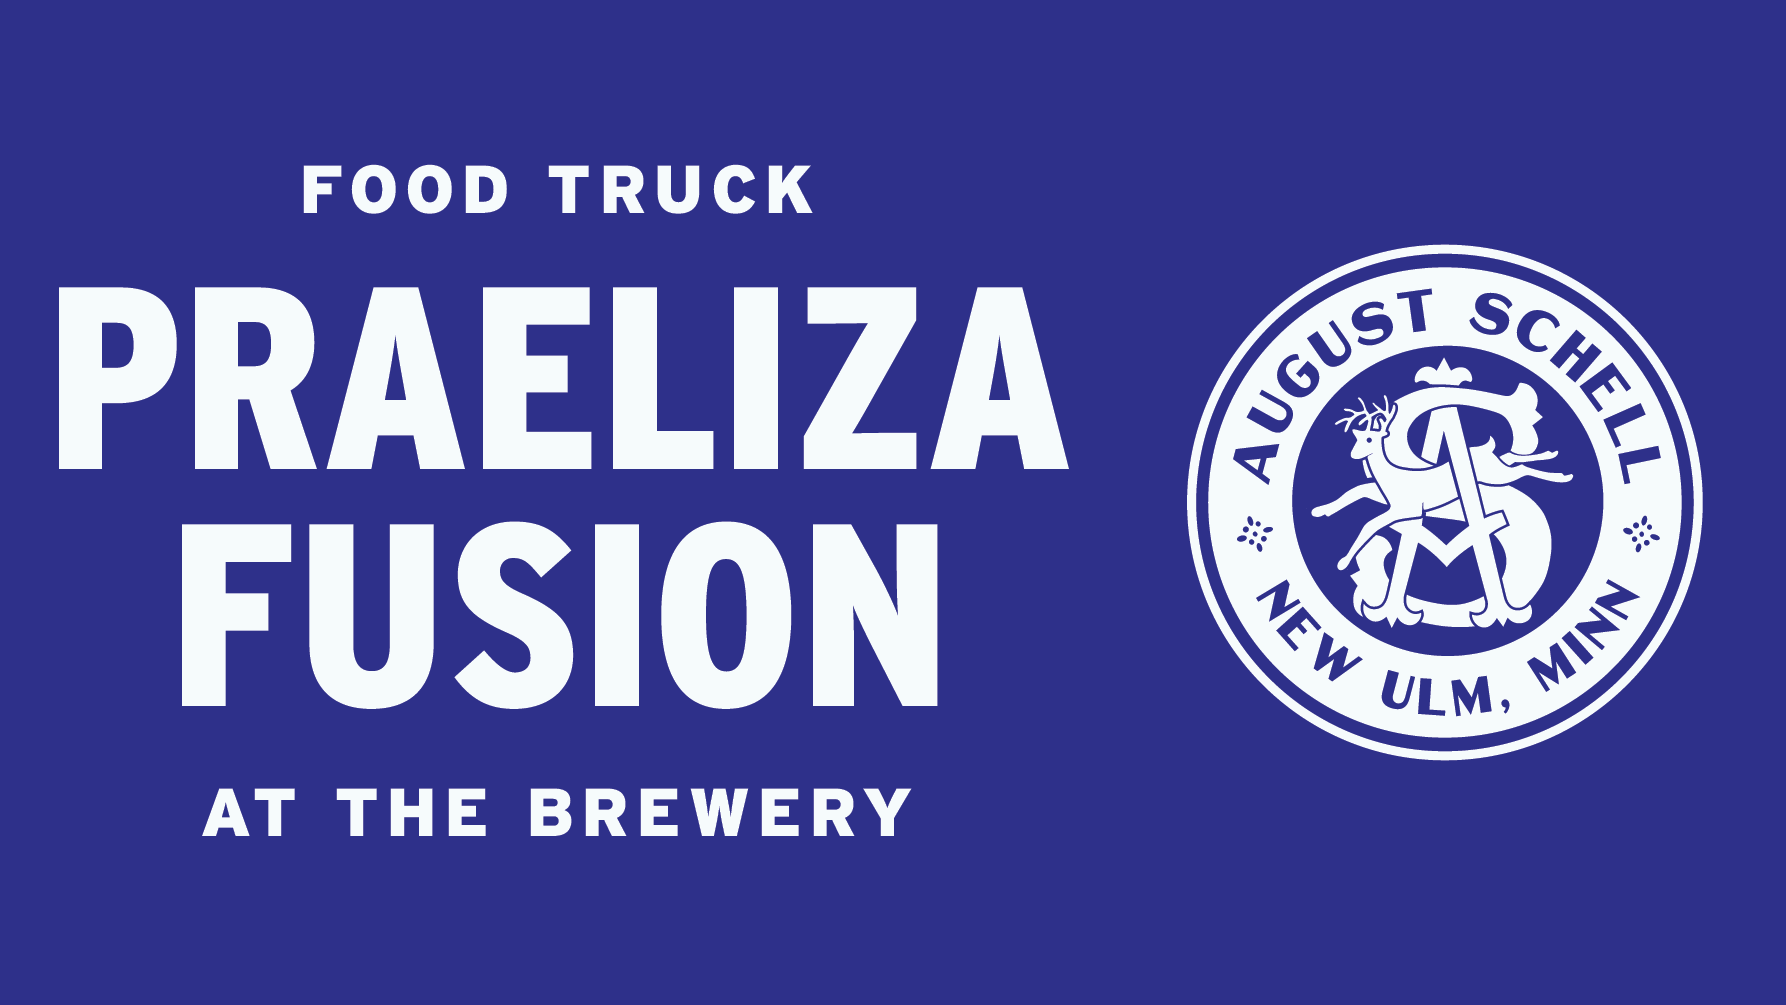 Blue rectangular background. Text says: Food Truck Praeliza Fusion at the Brewery. The August Schell Brewing Company circle crest logo is to the right of the text.